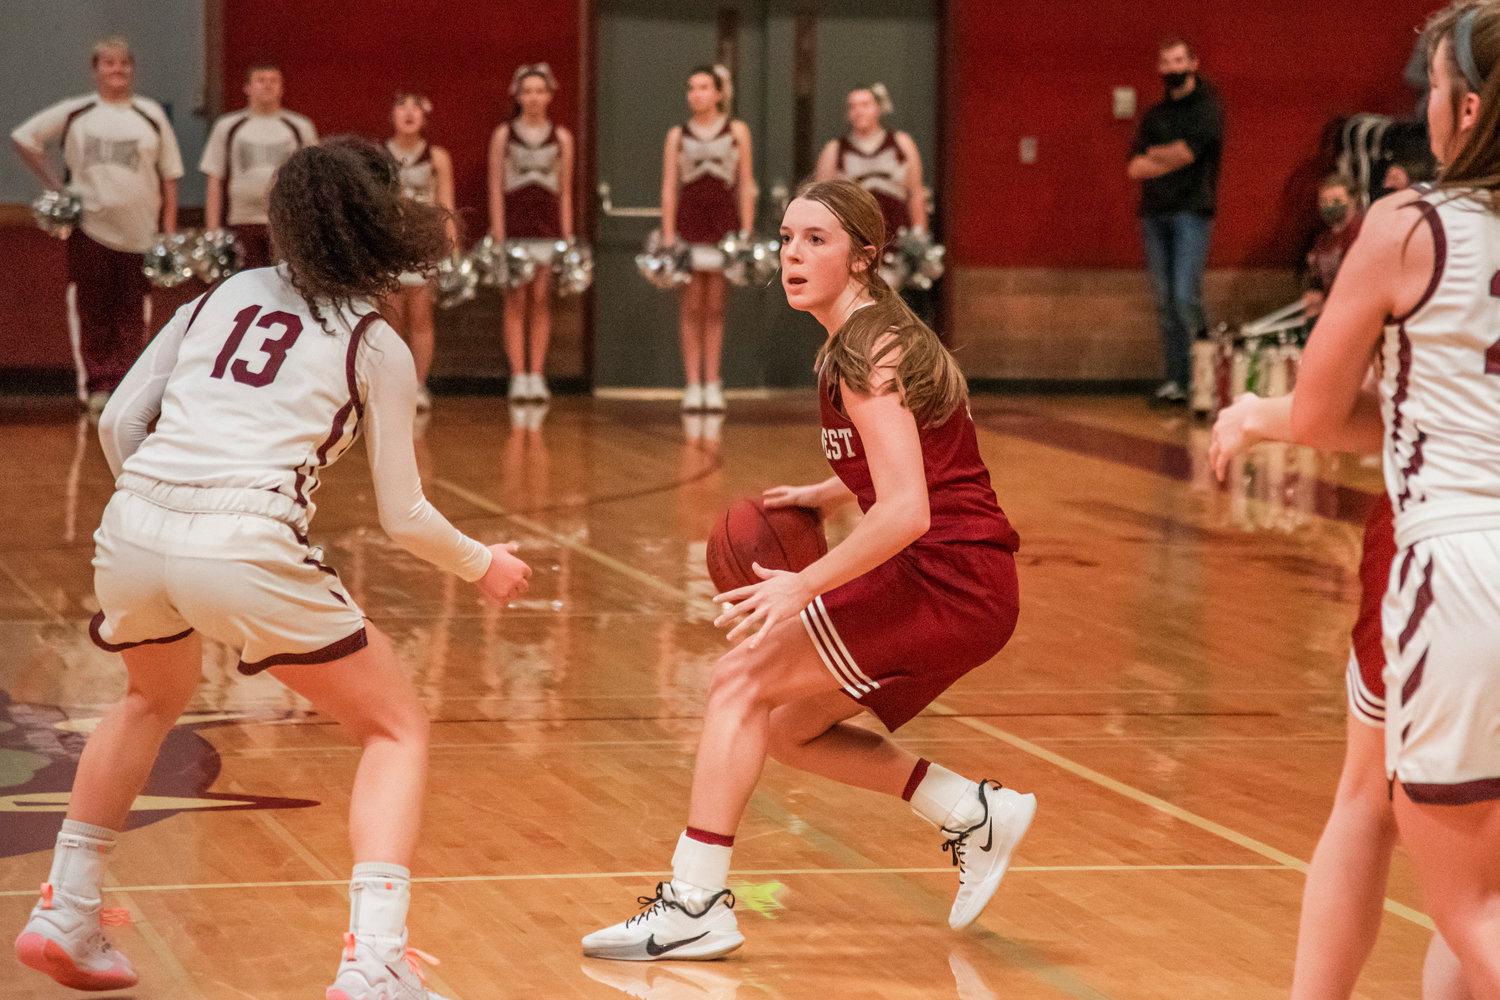 W.F. West’s Makayla Mencke (5) dribbles the basketball during a game in Montesano Tuesday night.